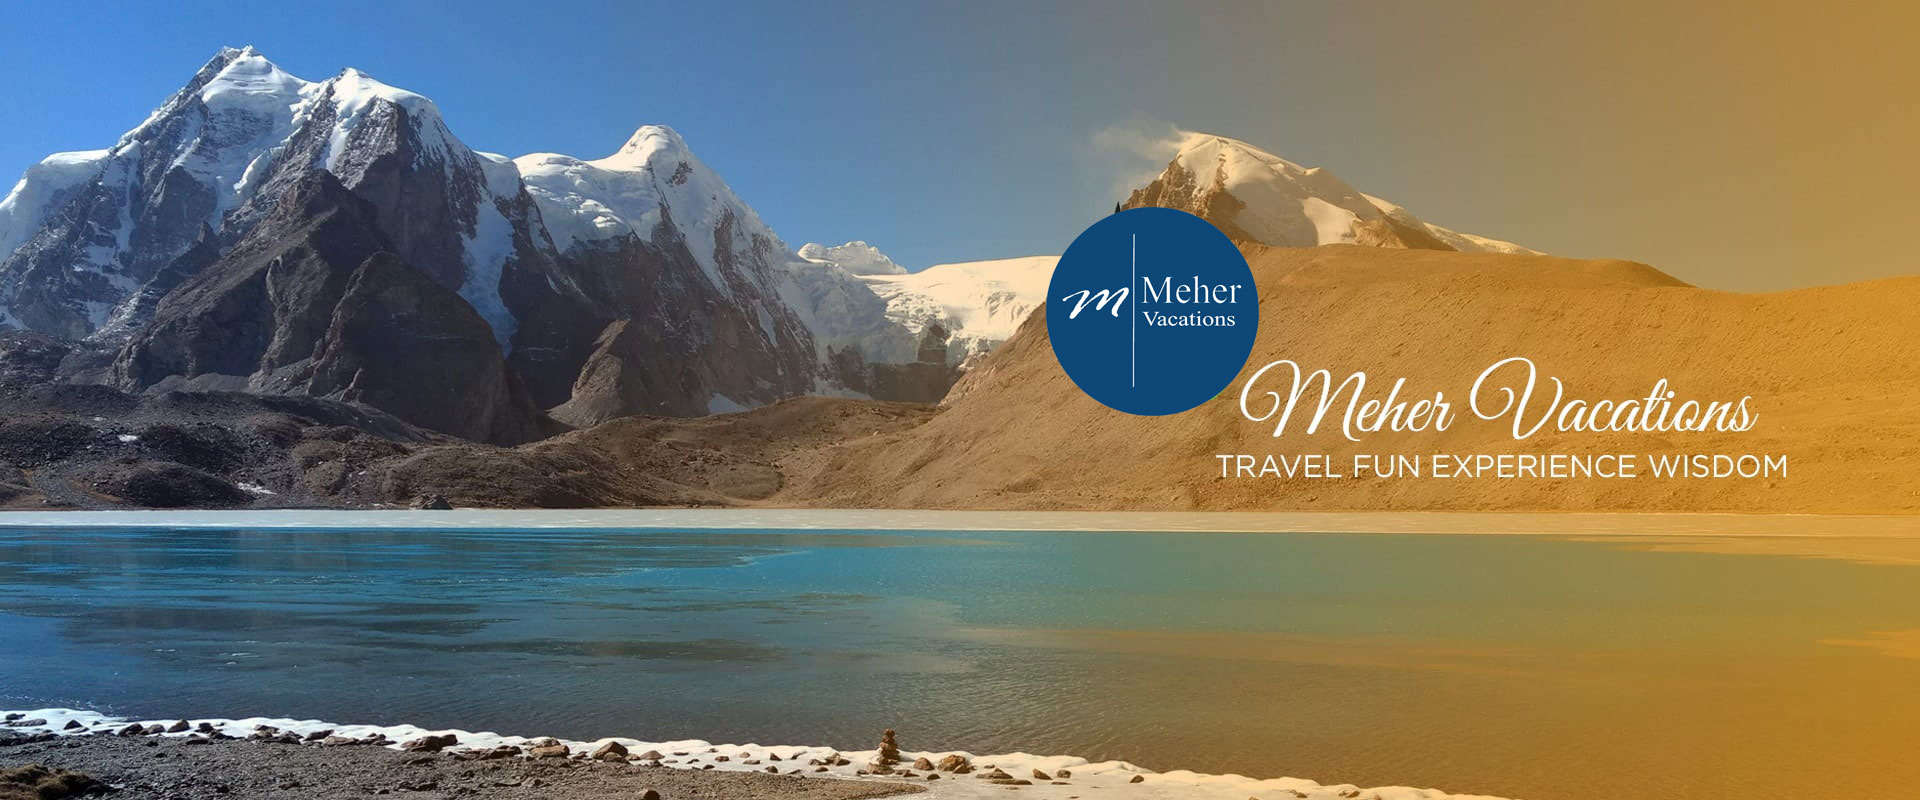 Meher Vacations